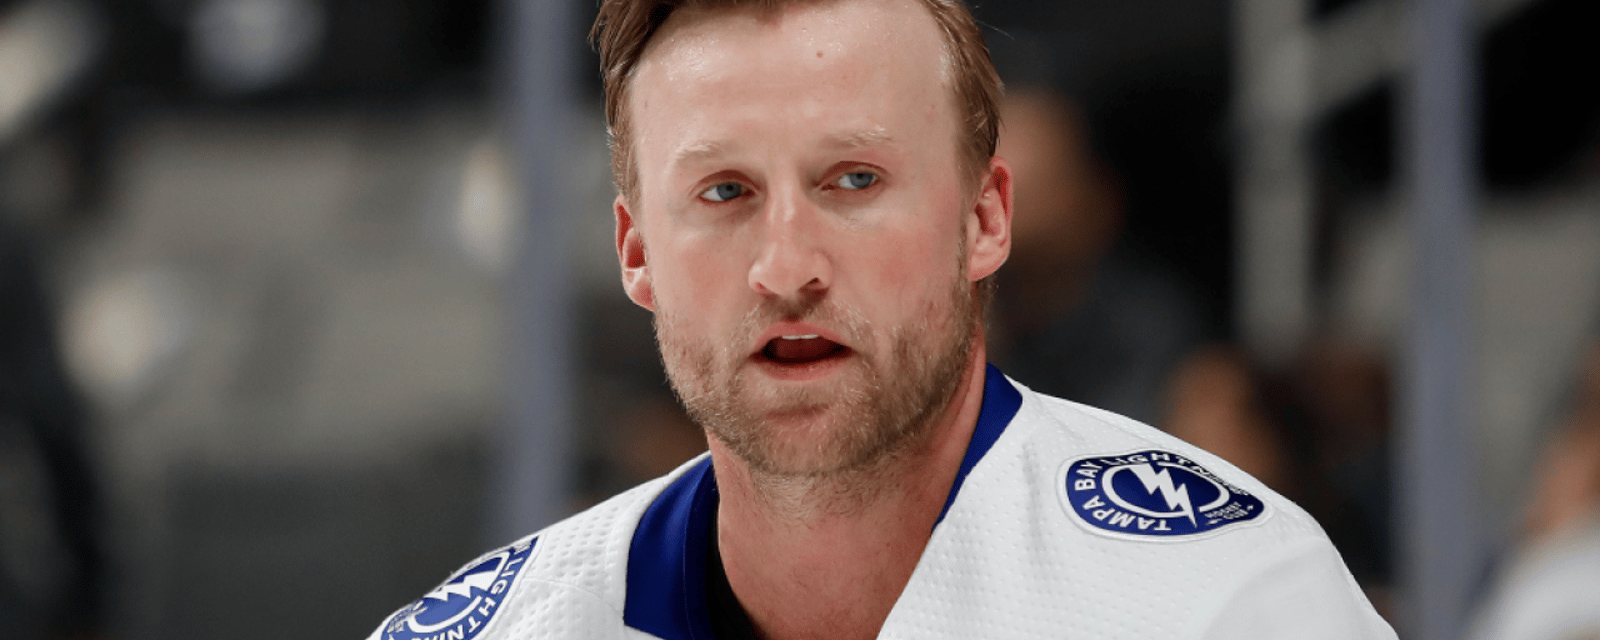 Blows keep coming to Steven Stamkos in Tampa despite 4-goal game last night! 